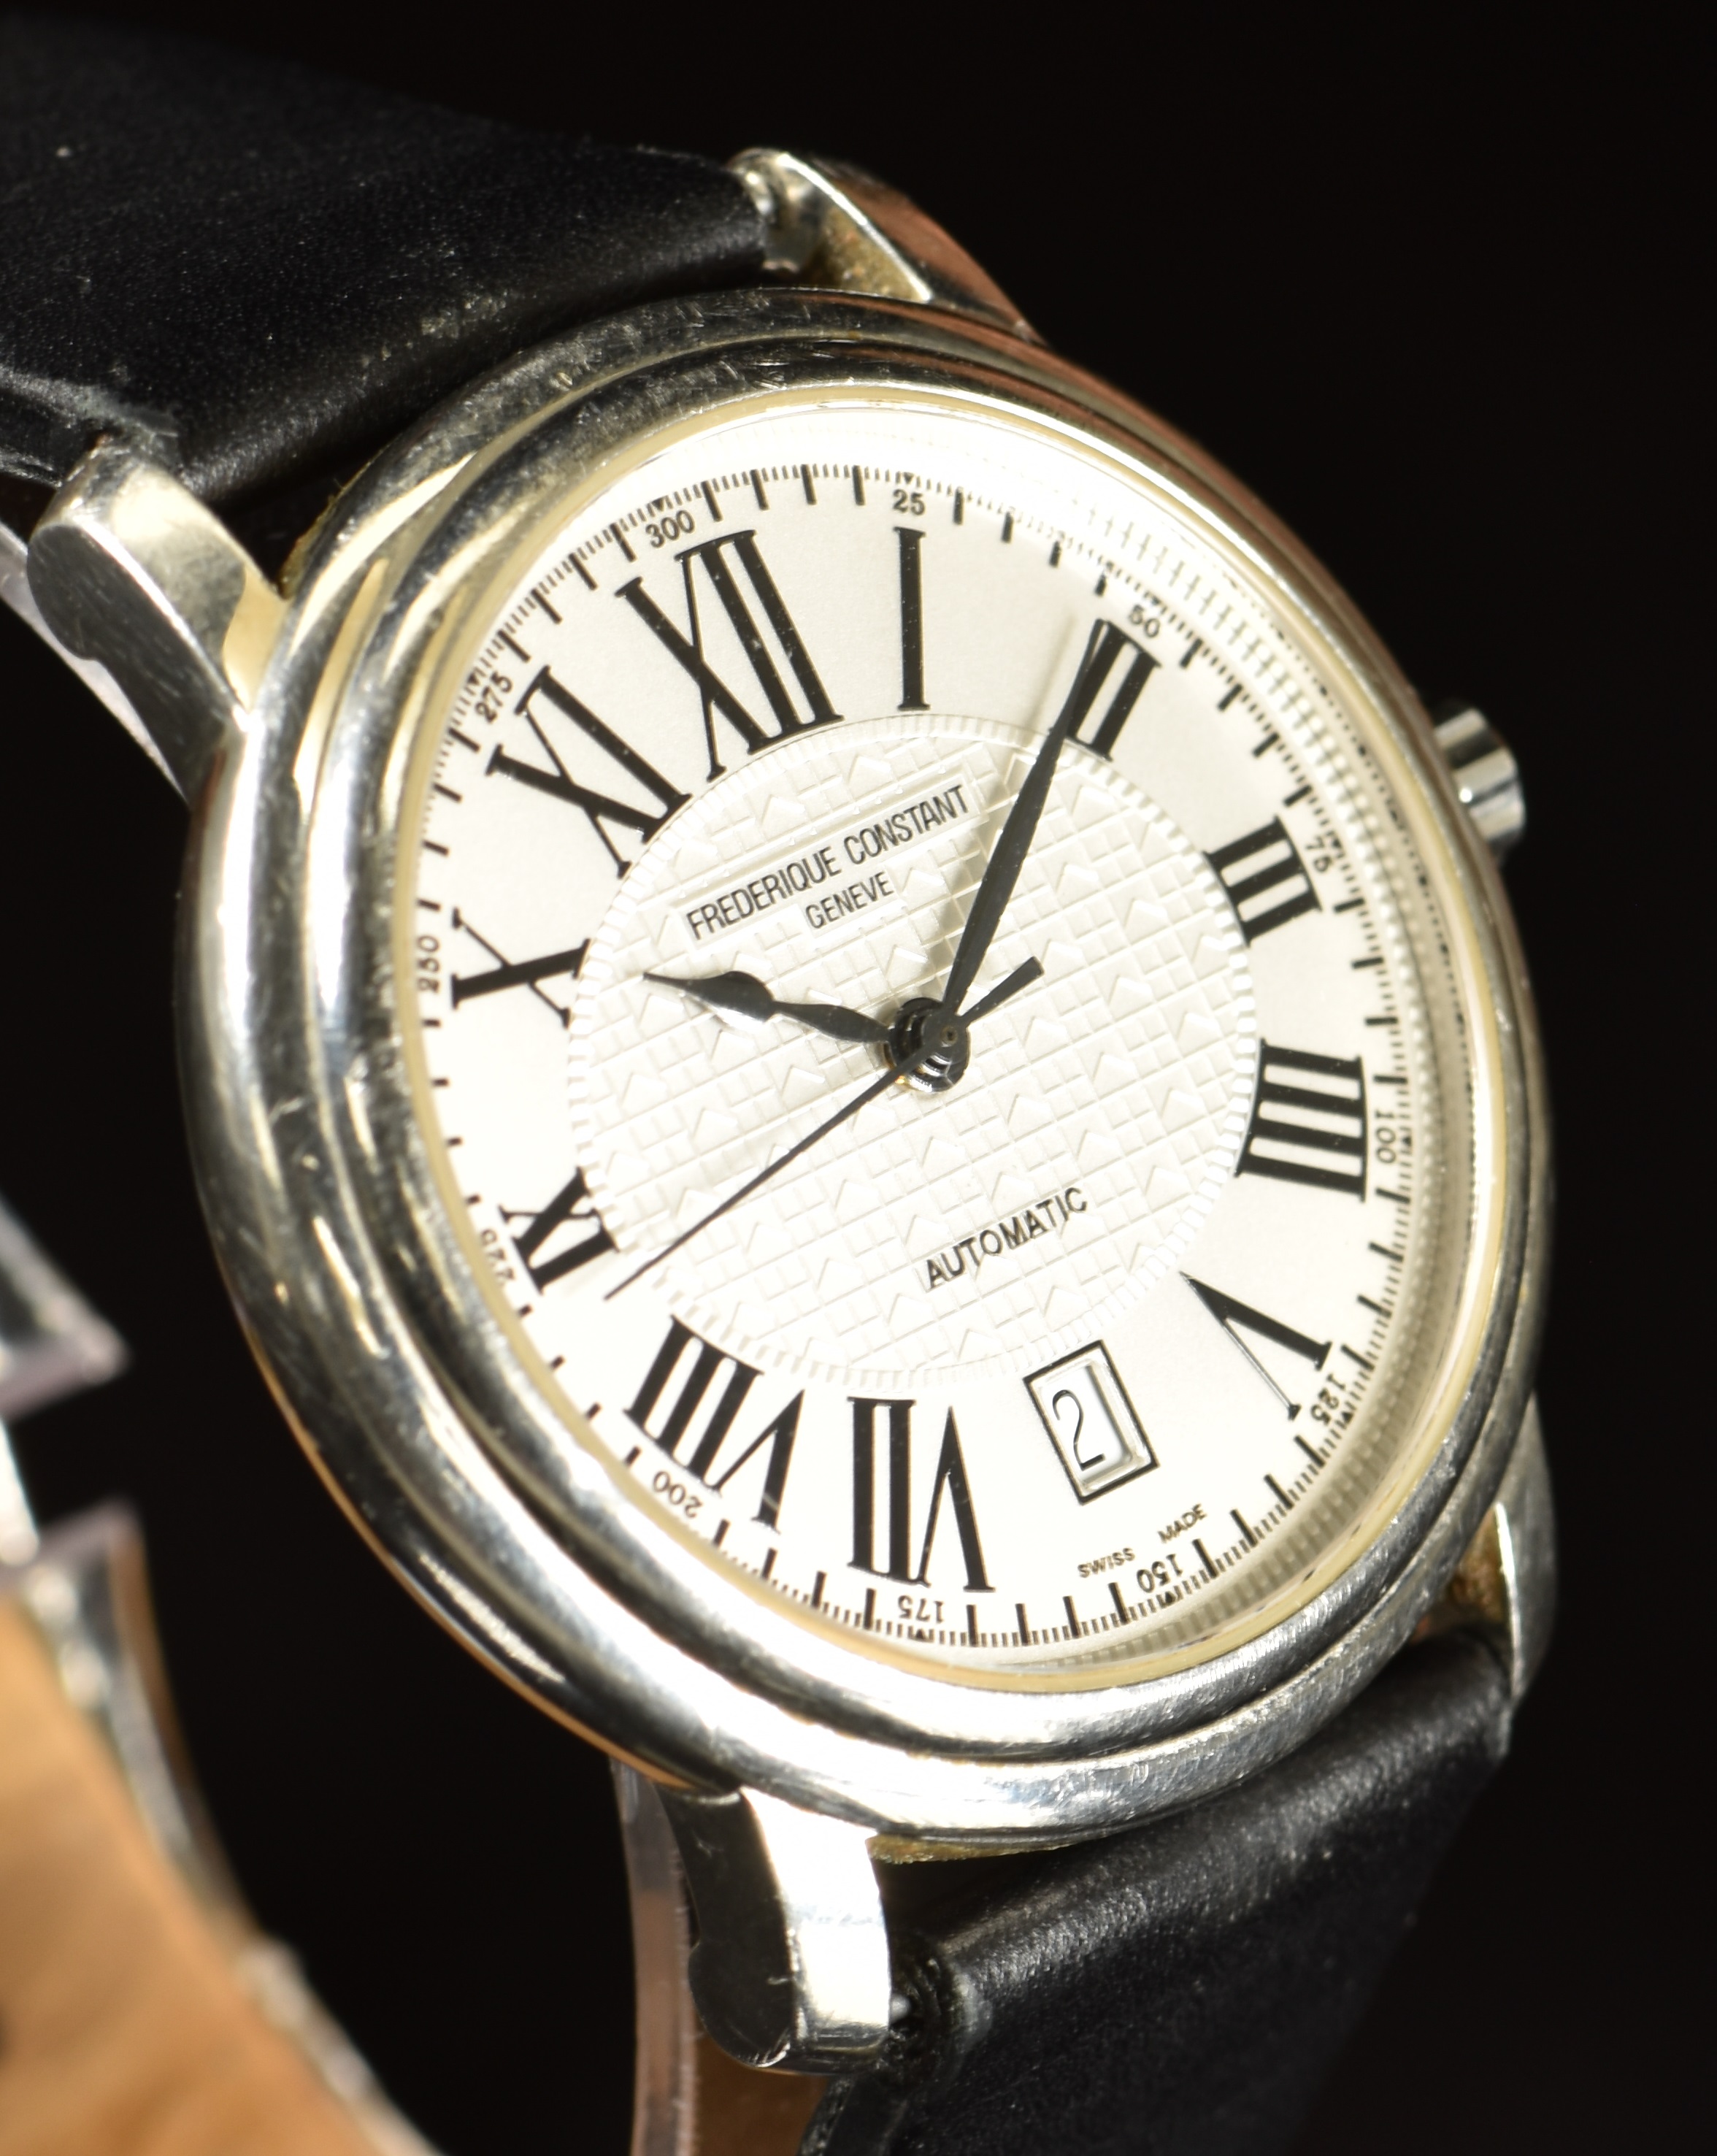 Frederique Constant Persuasion gentleman's automatic wristwatch ref. FC-303/310/315XP4/5/6 with date - Image 6 of 8